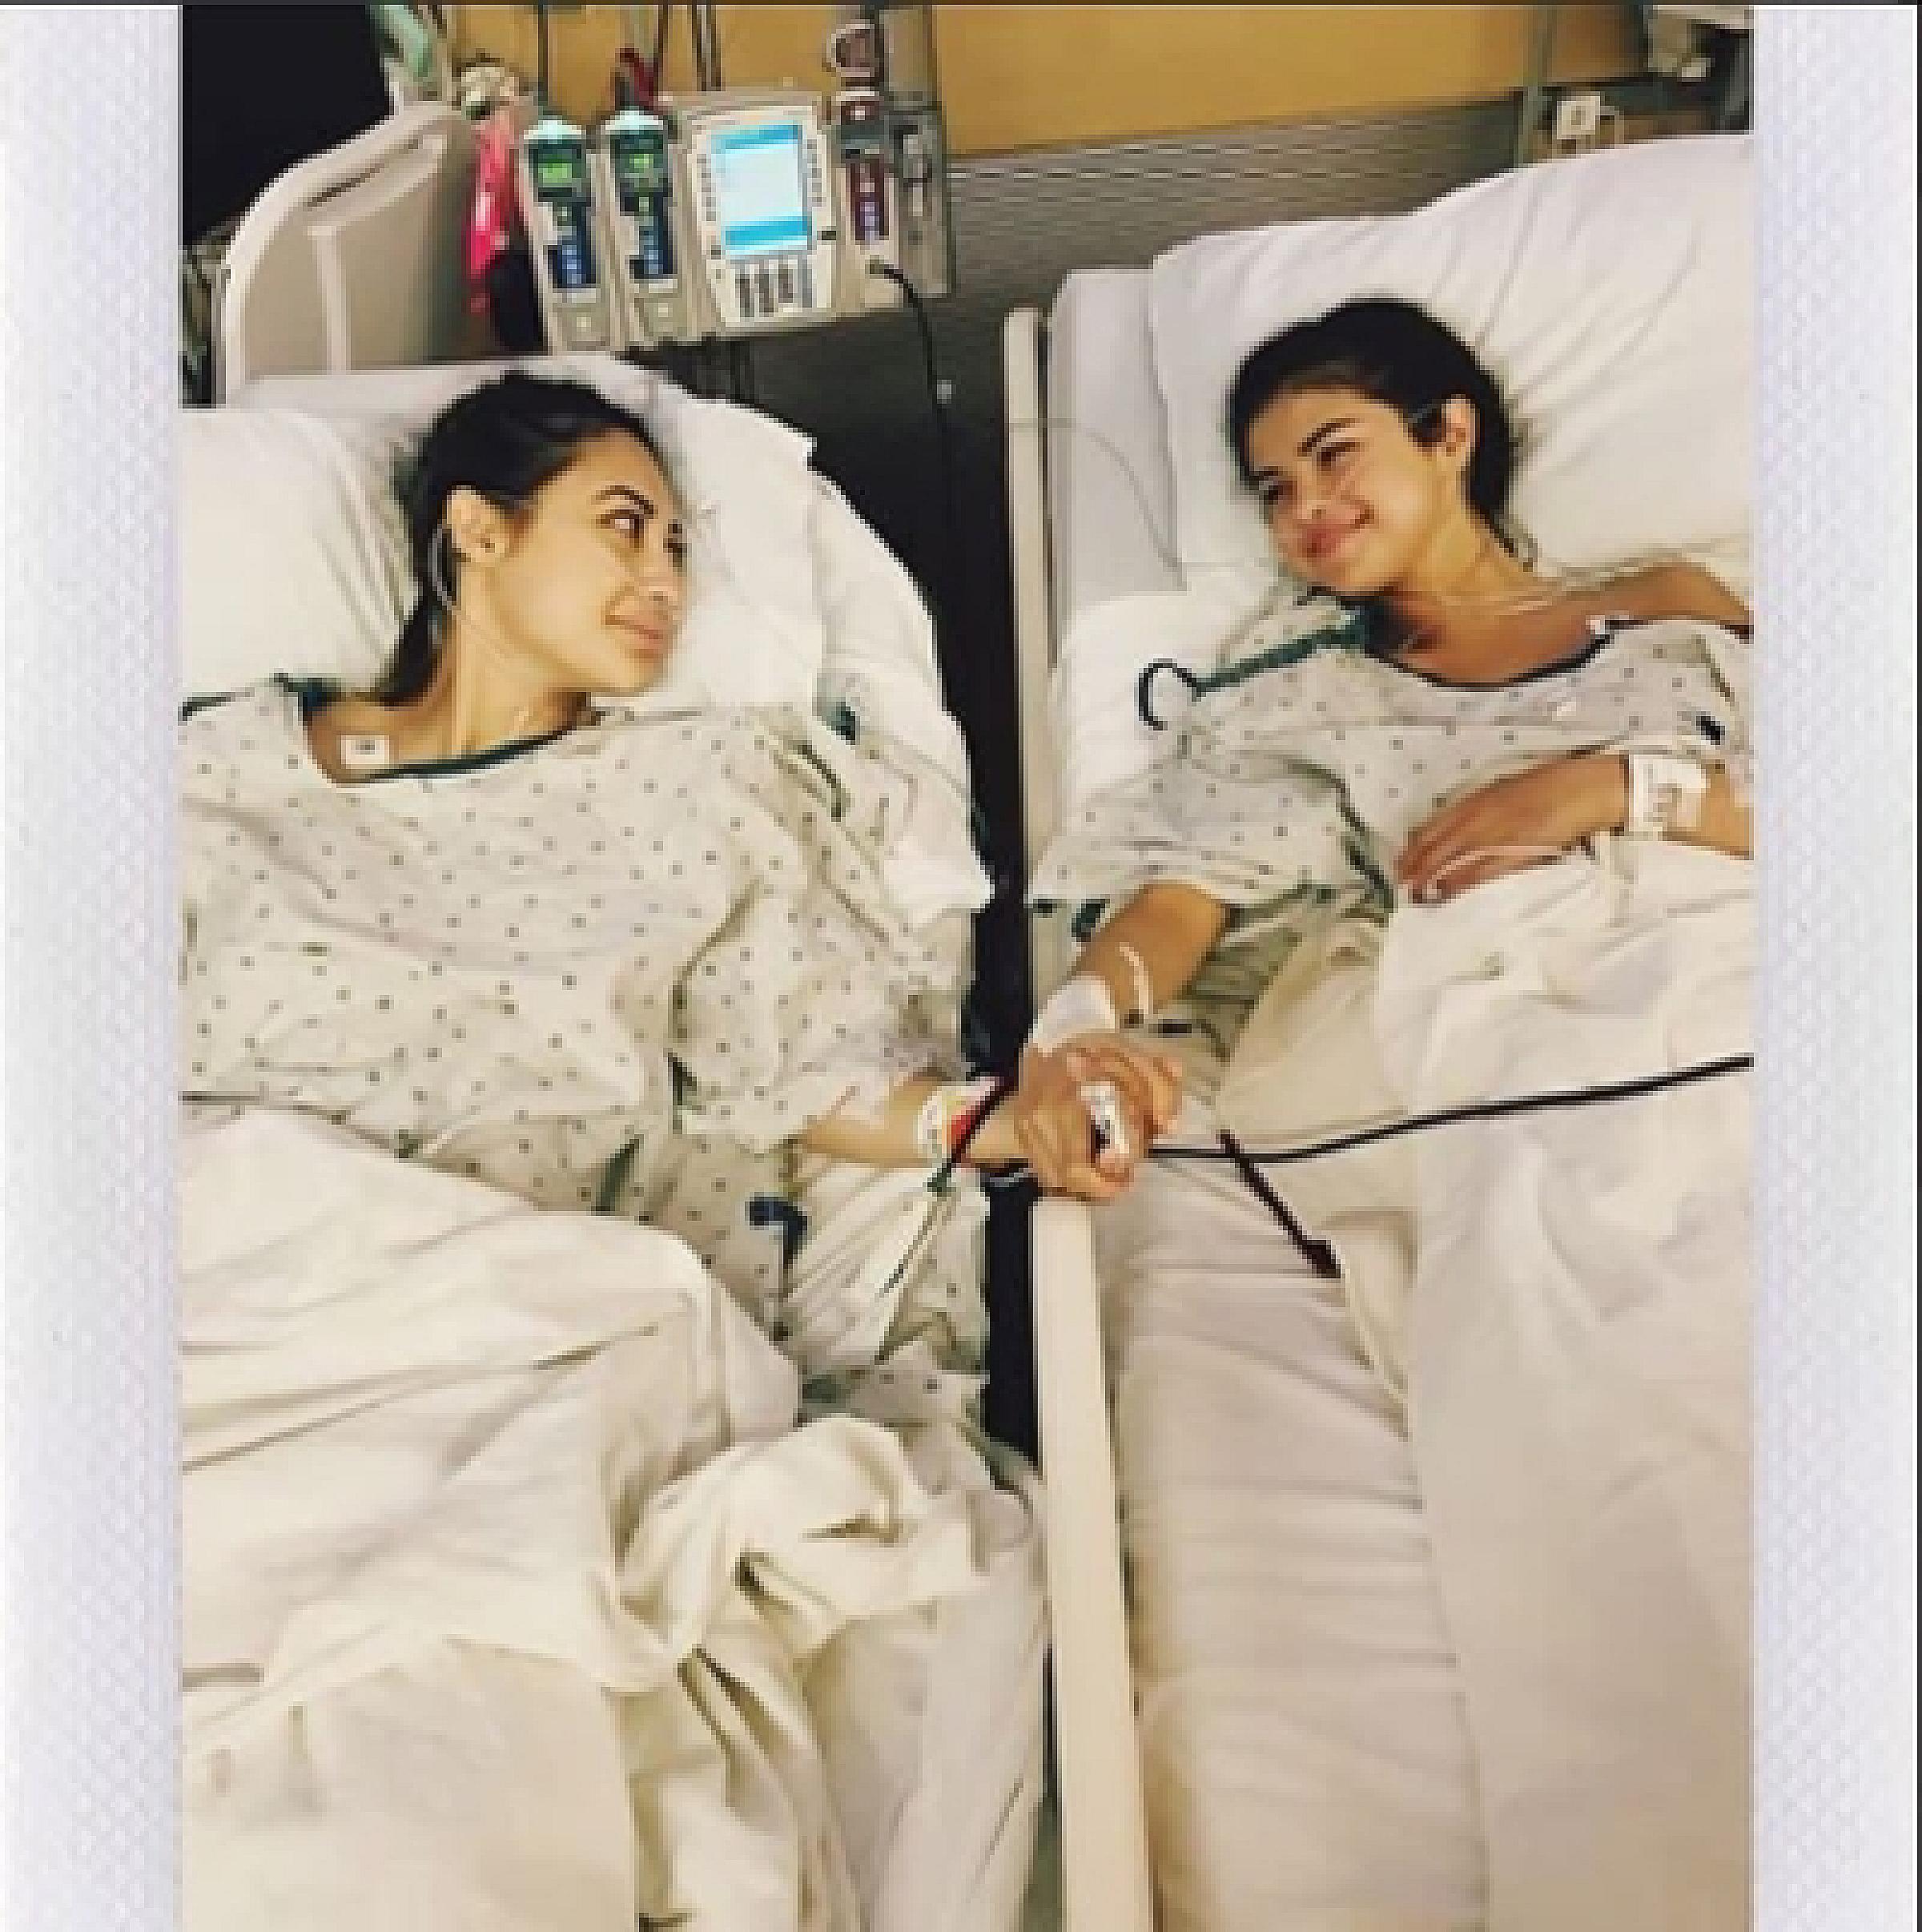 Selena Gomez and friend in hospital beds